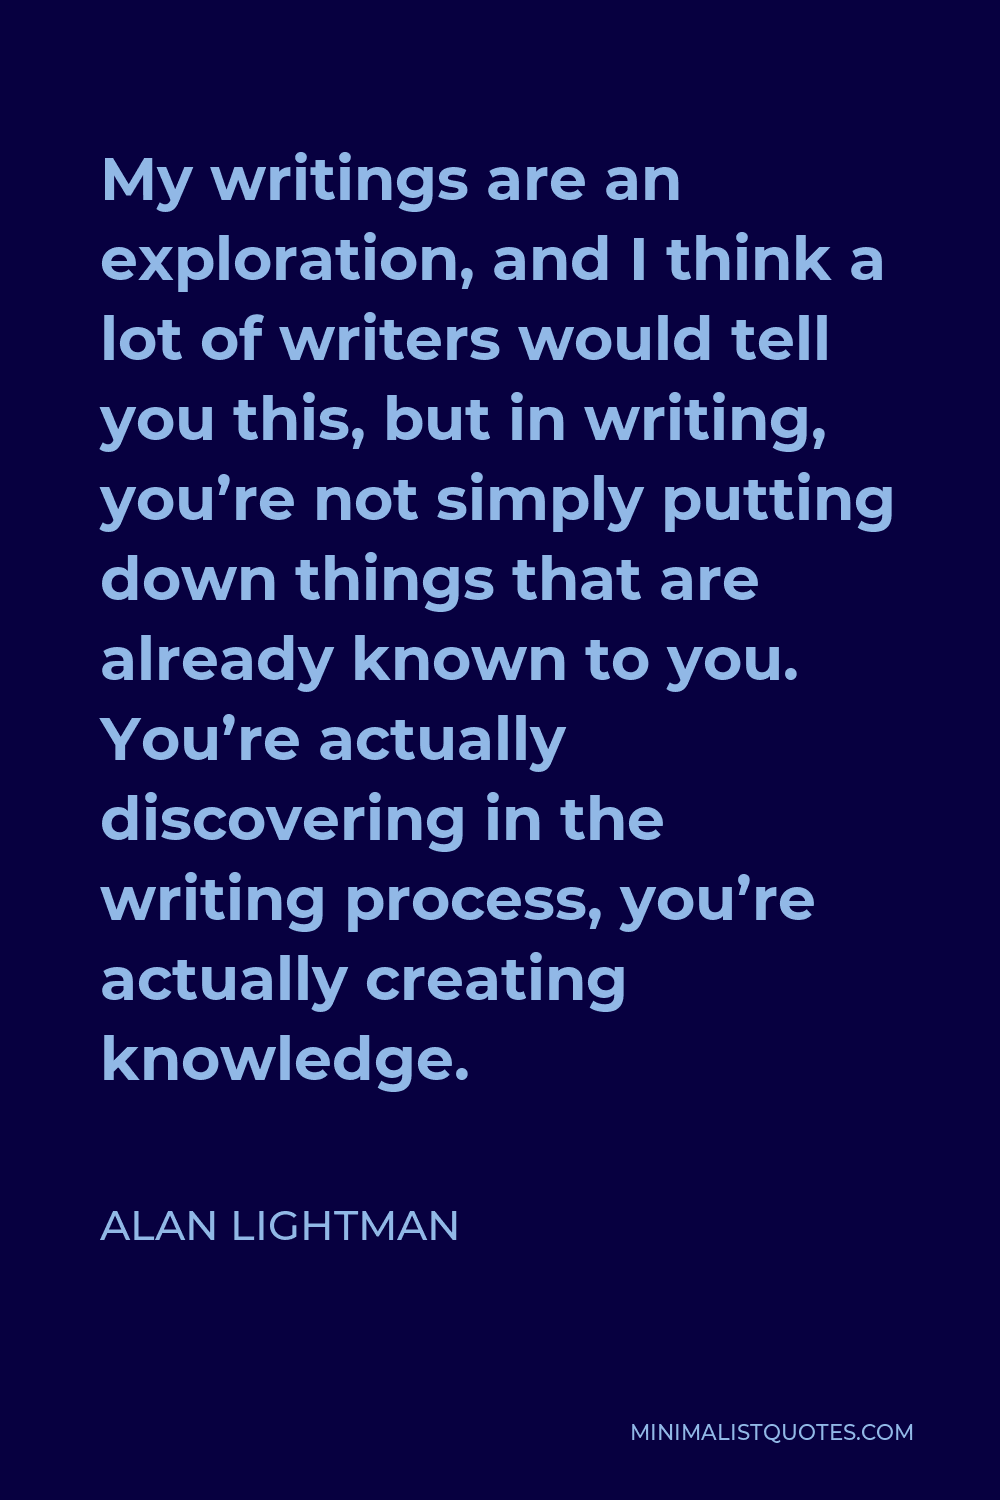 Alan Lightman Quote - My writings are an exploration, and I think a lot of writers would tell you this, but in writing, you’re not simply putting down things that are already known to you. You’re actually discovering in the writing process, you’re actually creating knowledge.